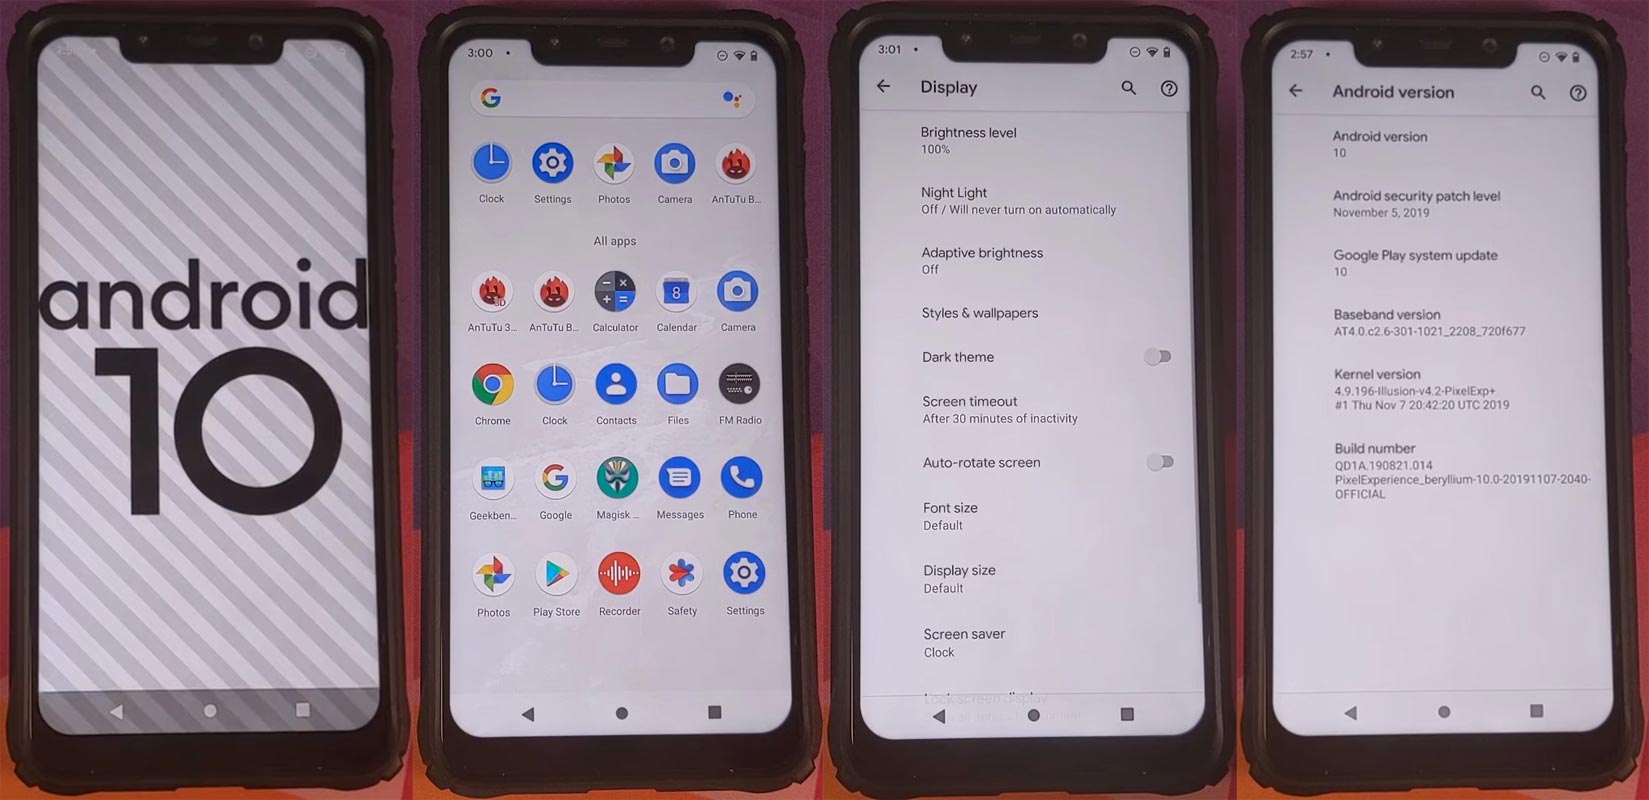 Pocophone F1 Pixel Expertience Android 10 Screenshots